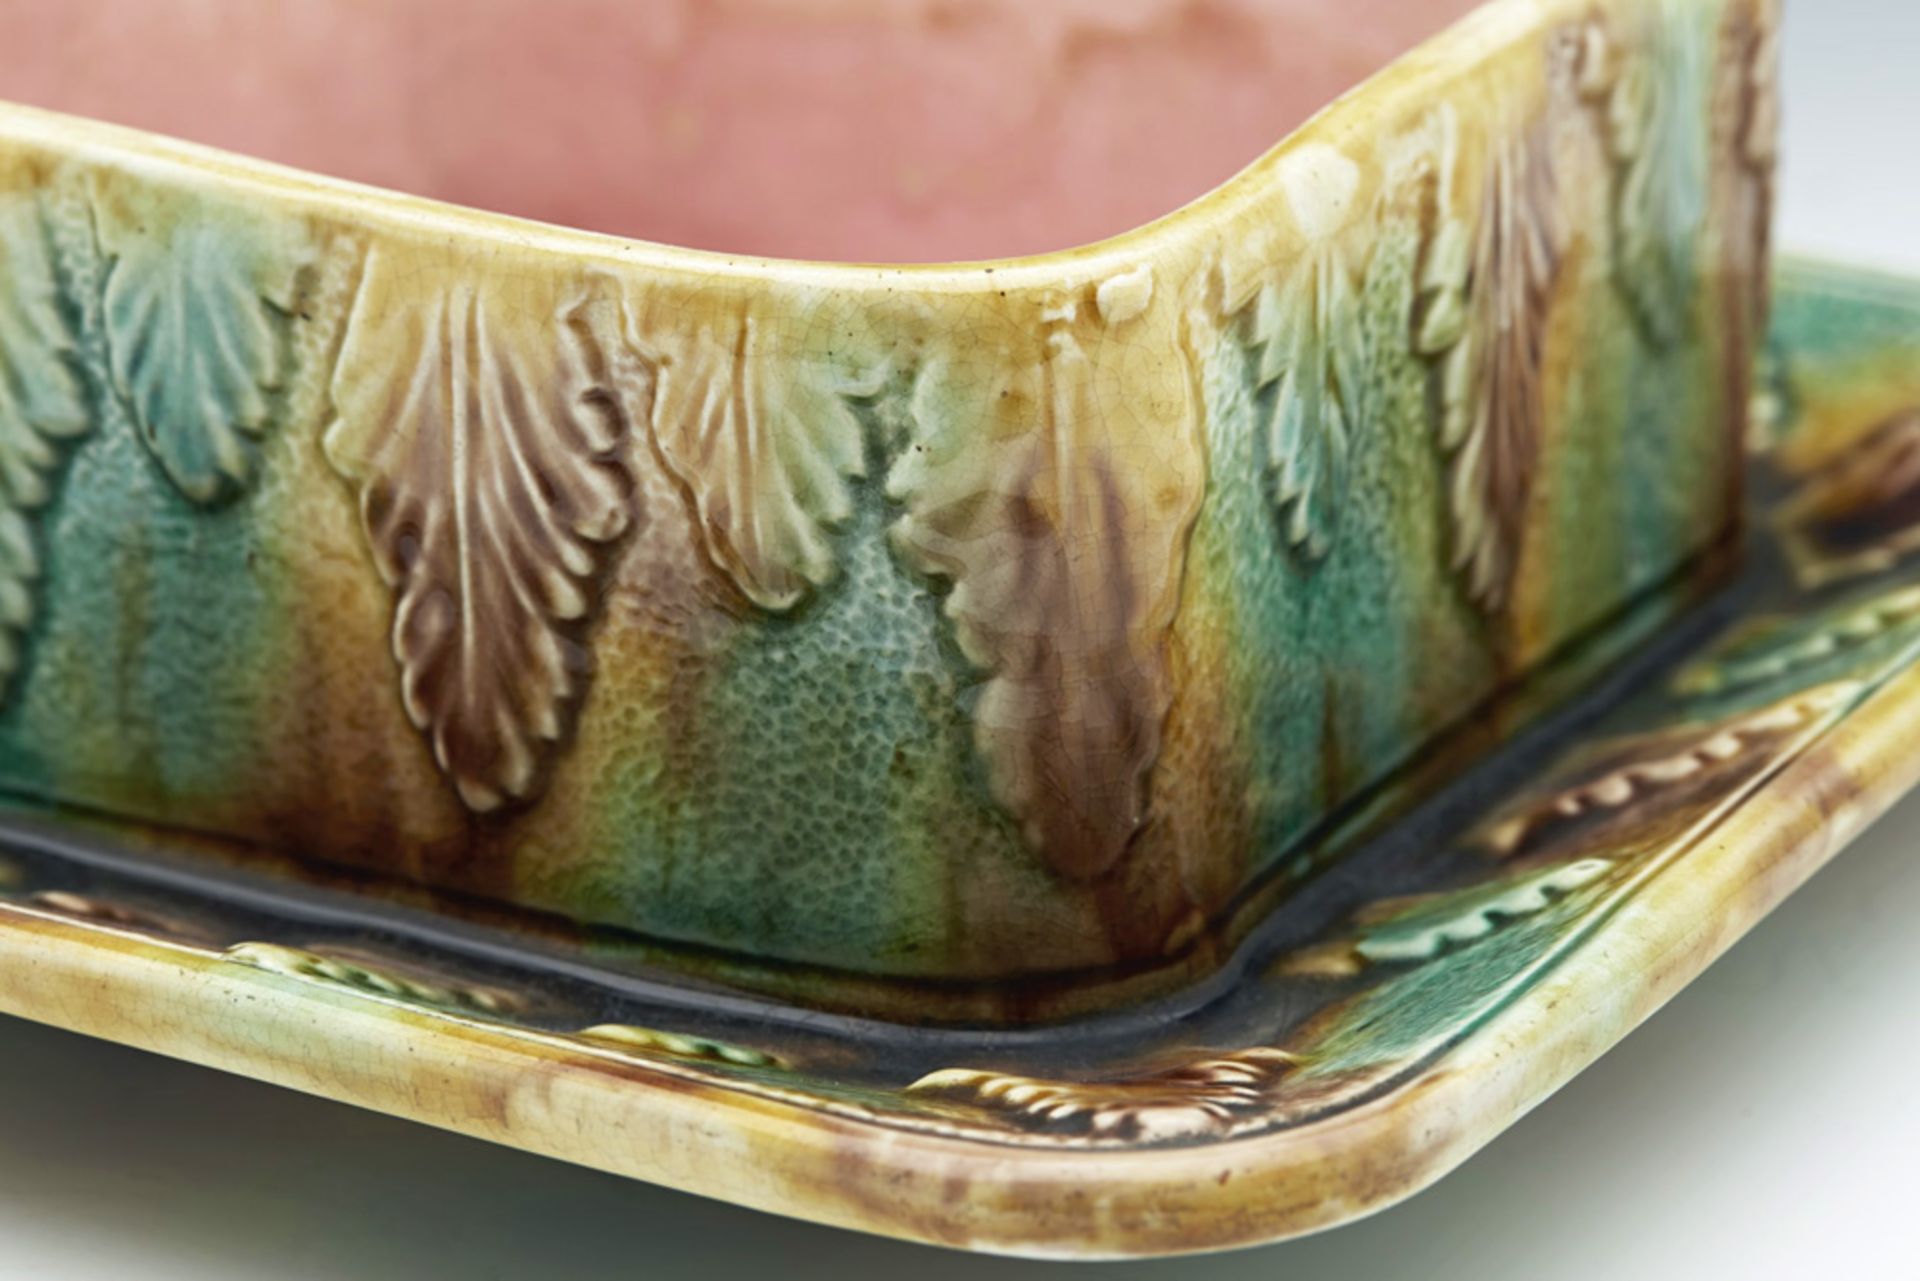 RARE ANTIQUE ENGLISH MAJOLICA SARDINE DISH WITH FISH AND LEAVES C.1865 - Image 5 of 10